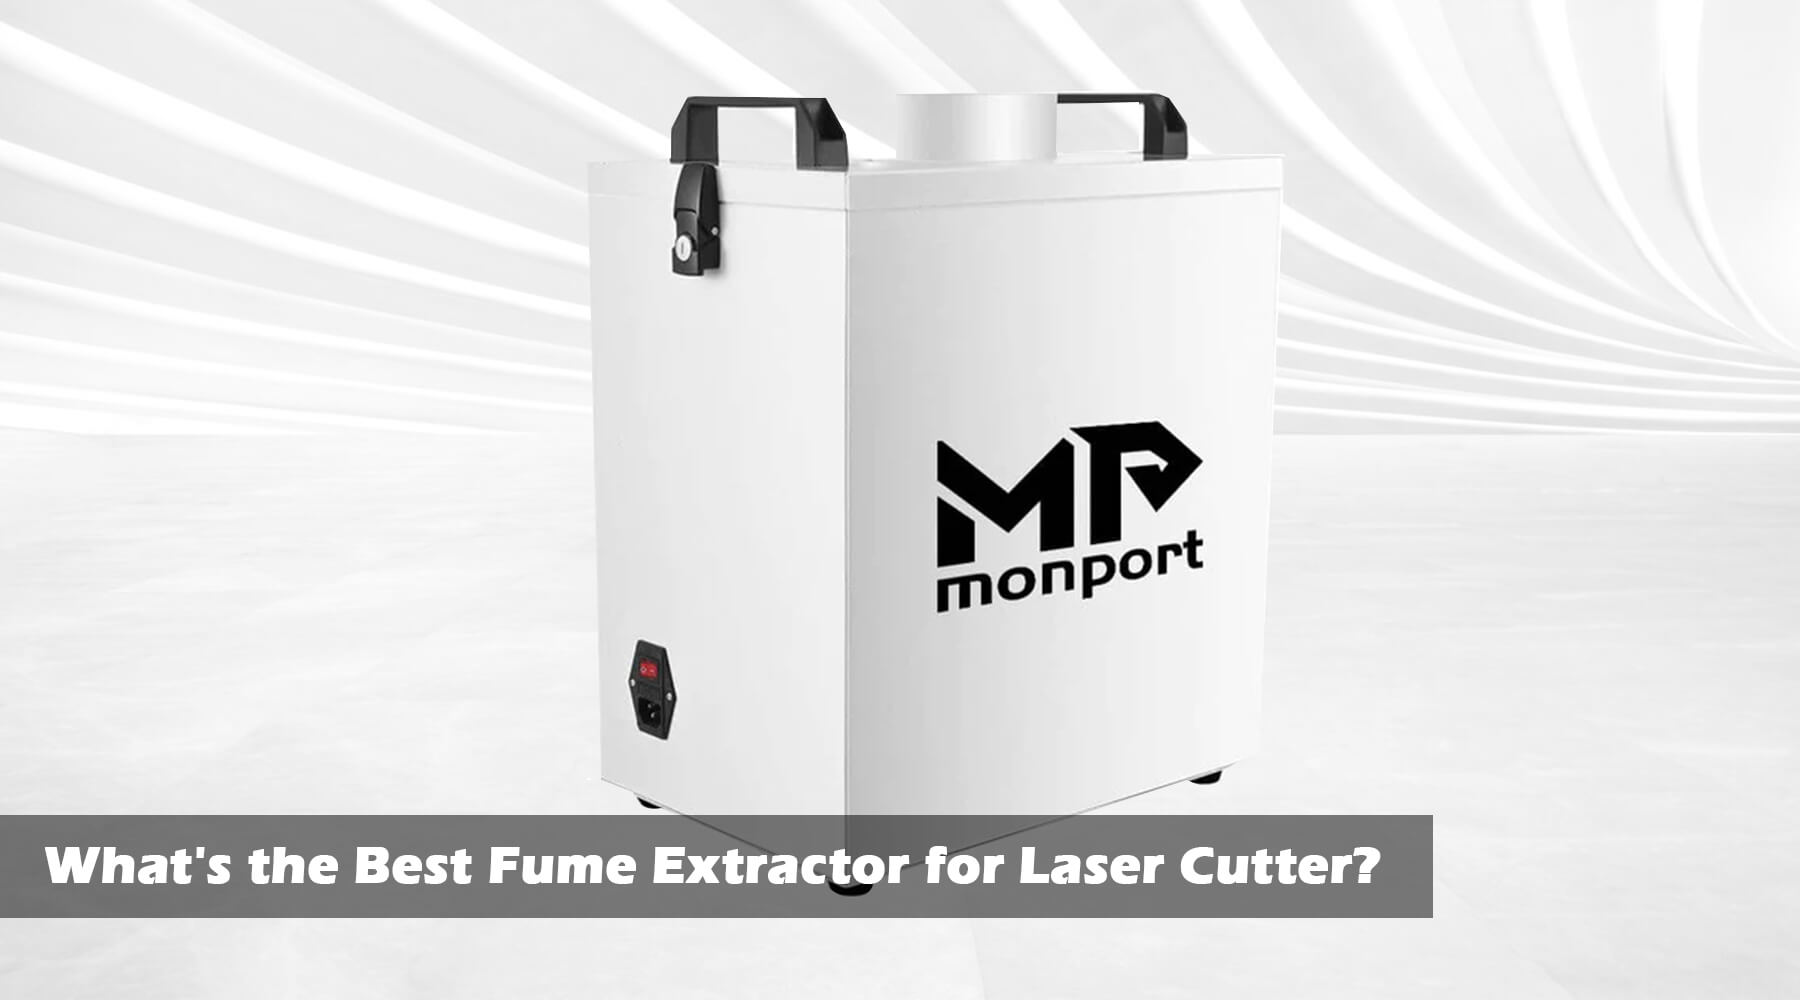 What's the Best Fume Extractor for Laser Cutter?